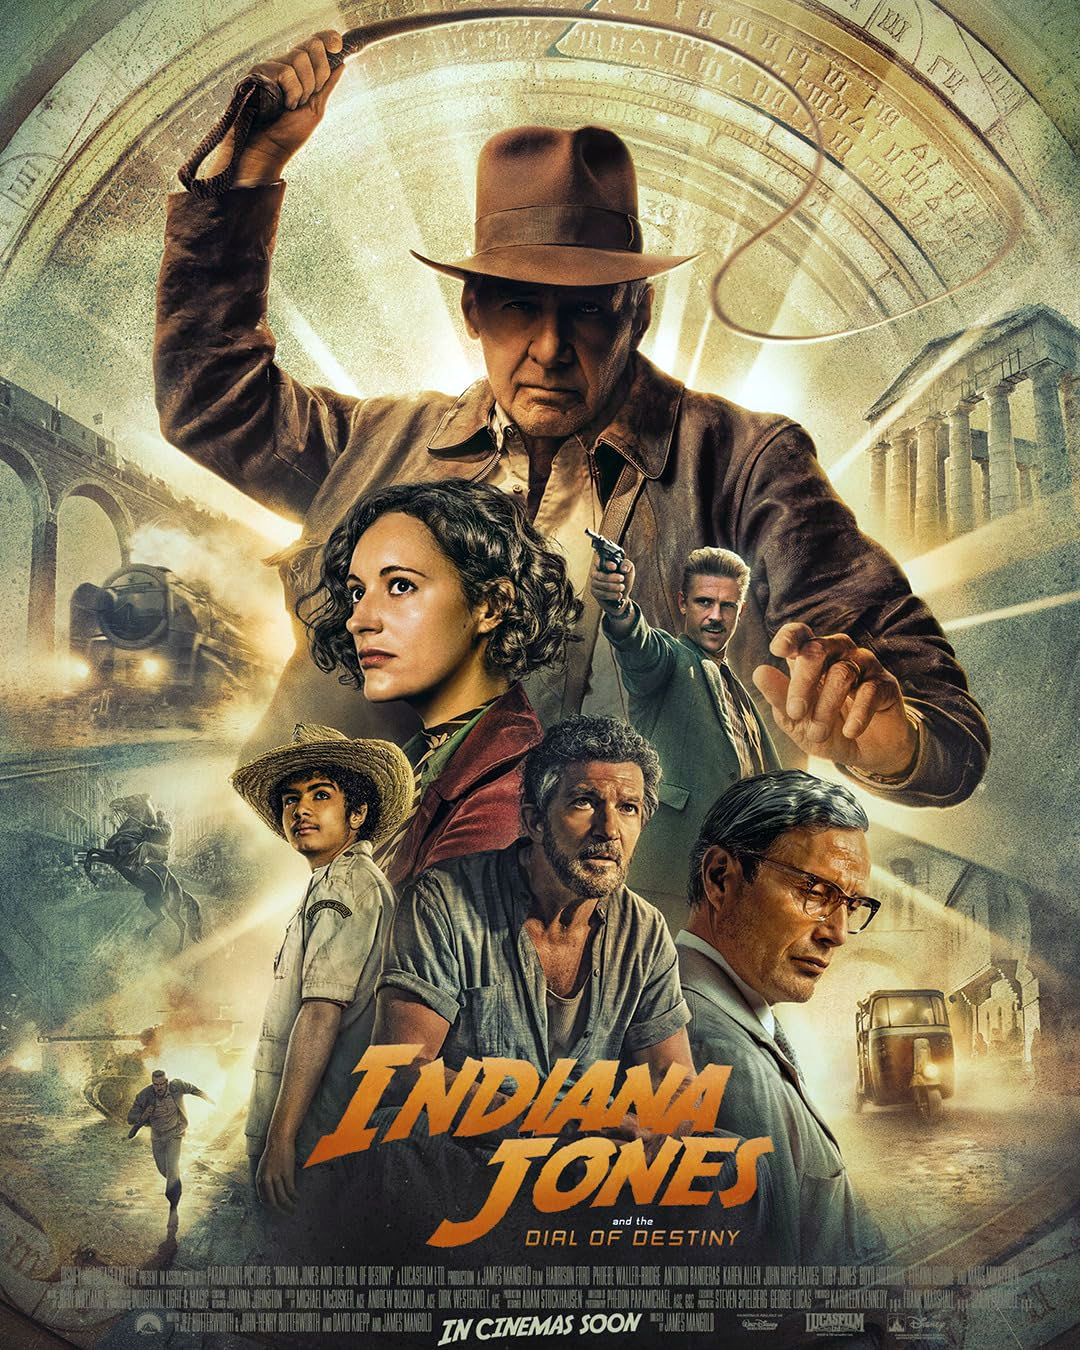 Indiana Jones and the Dial of Destiny (2023) Poster